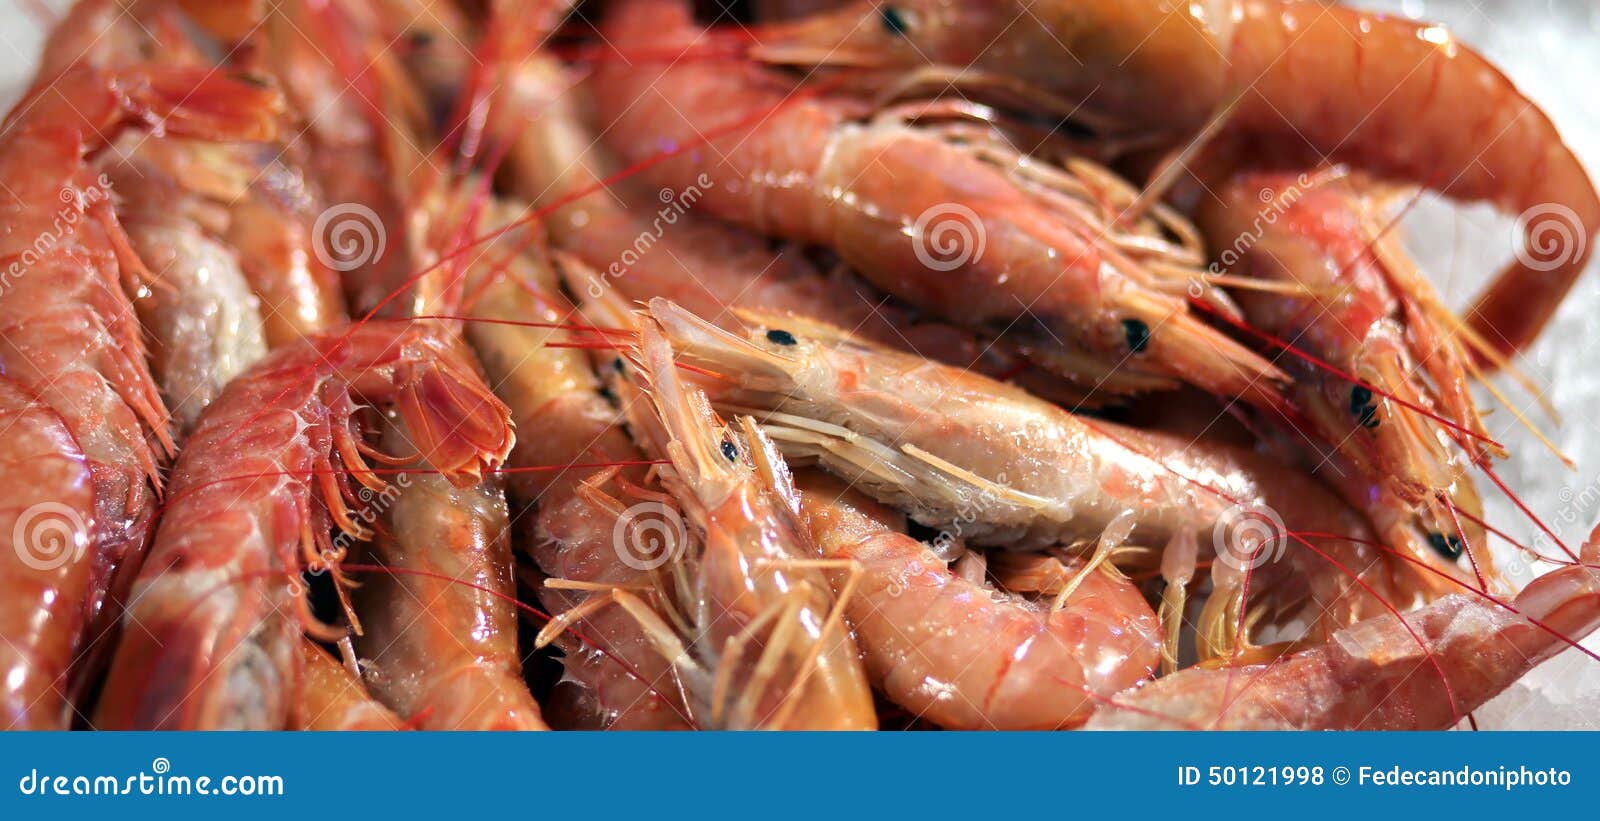 crustaceans for sale in the market